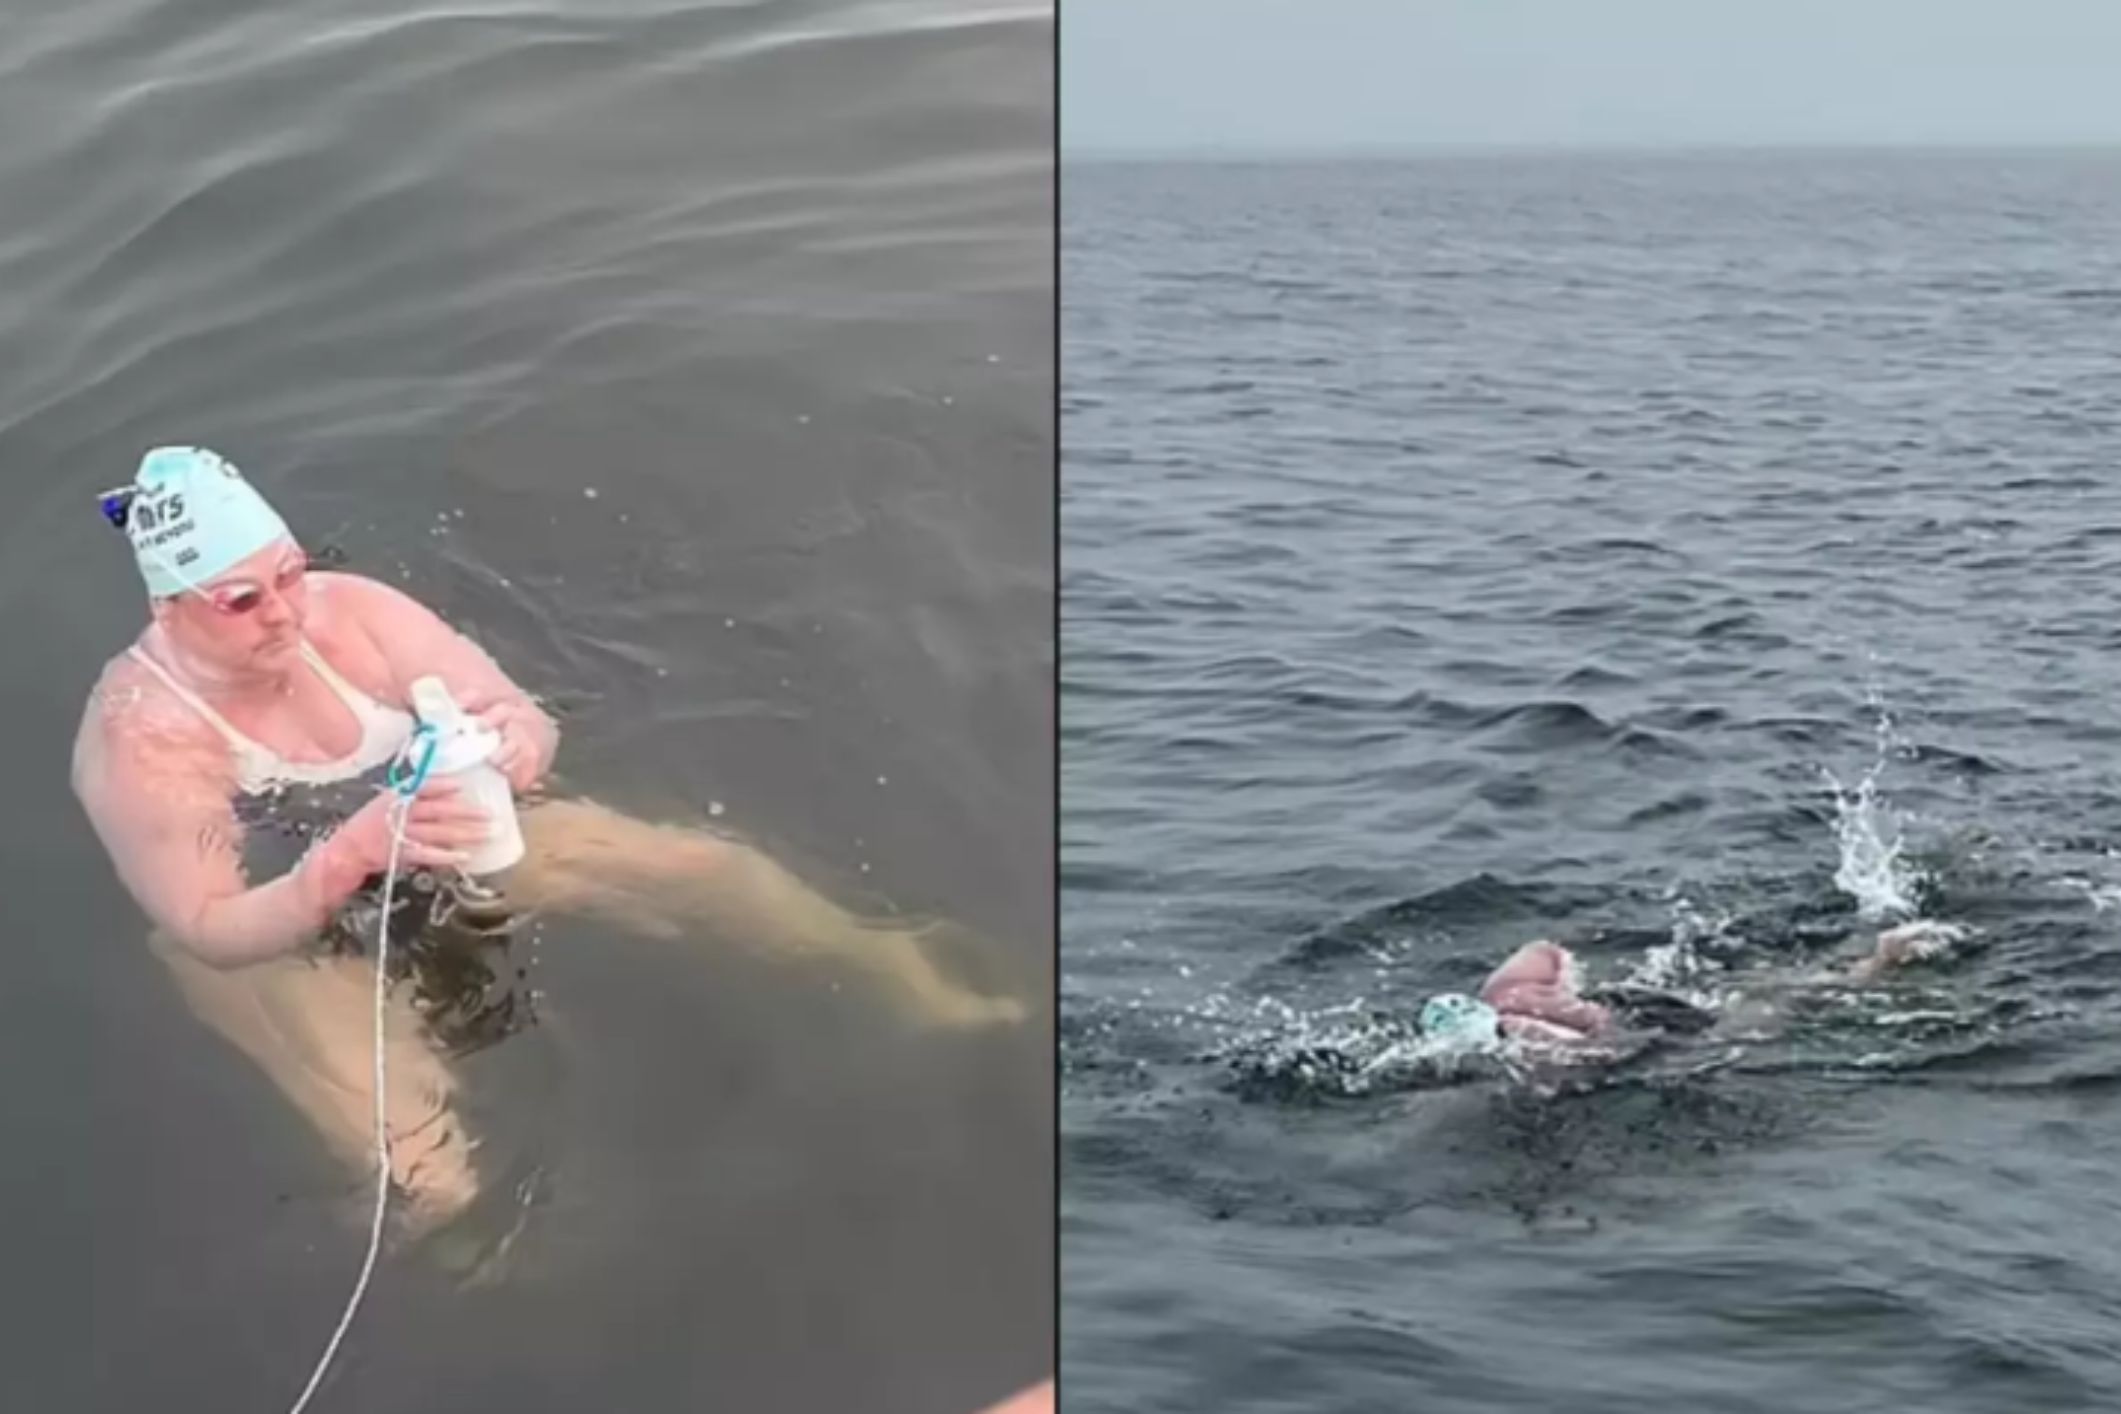 Grandmother Completes 17-Hour Swim Through Great White Shark-Infested Waters